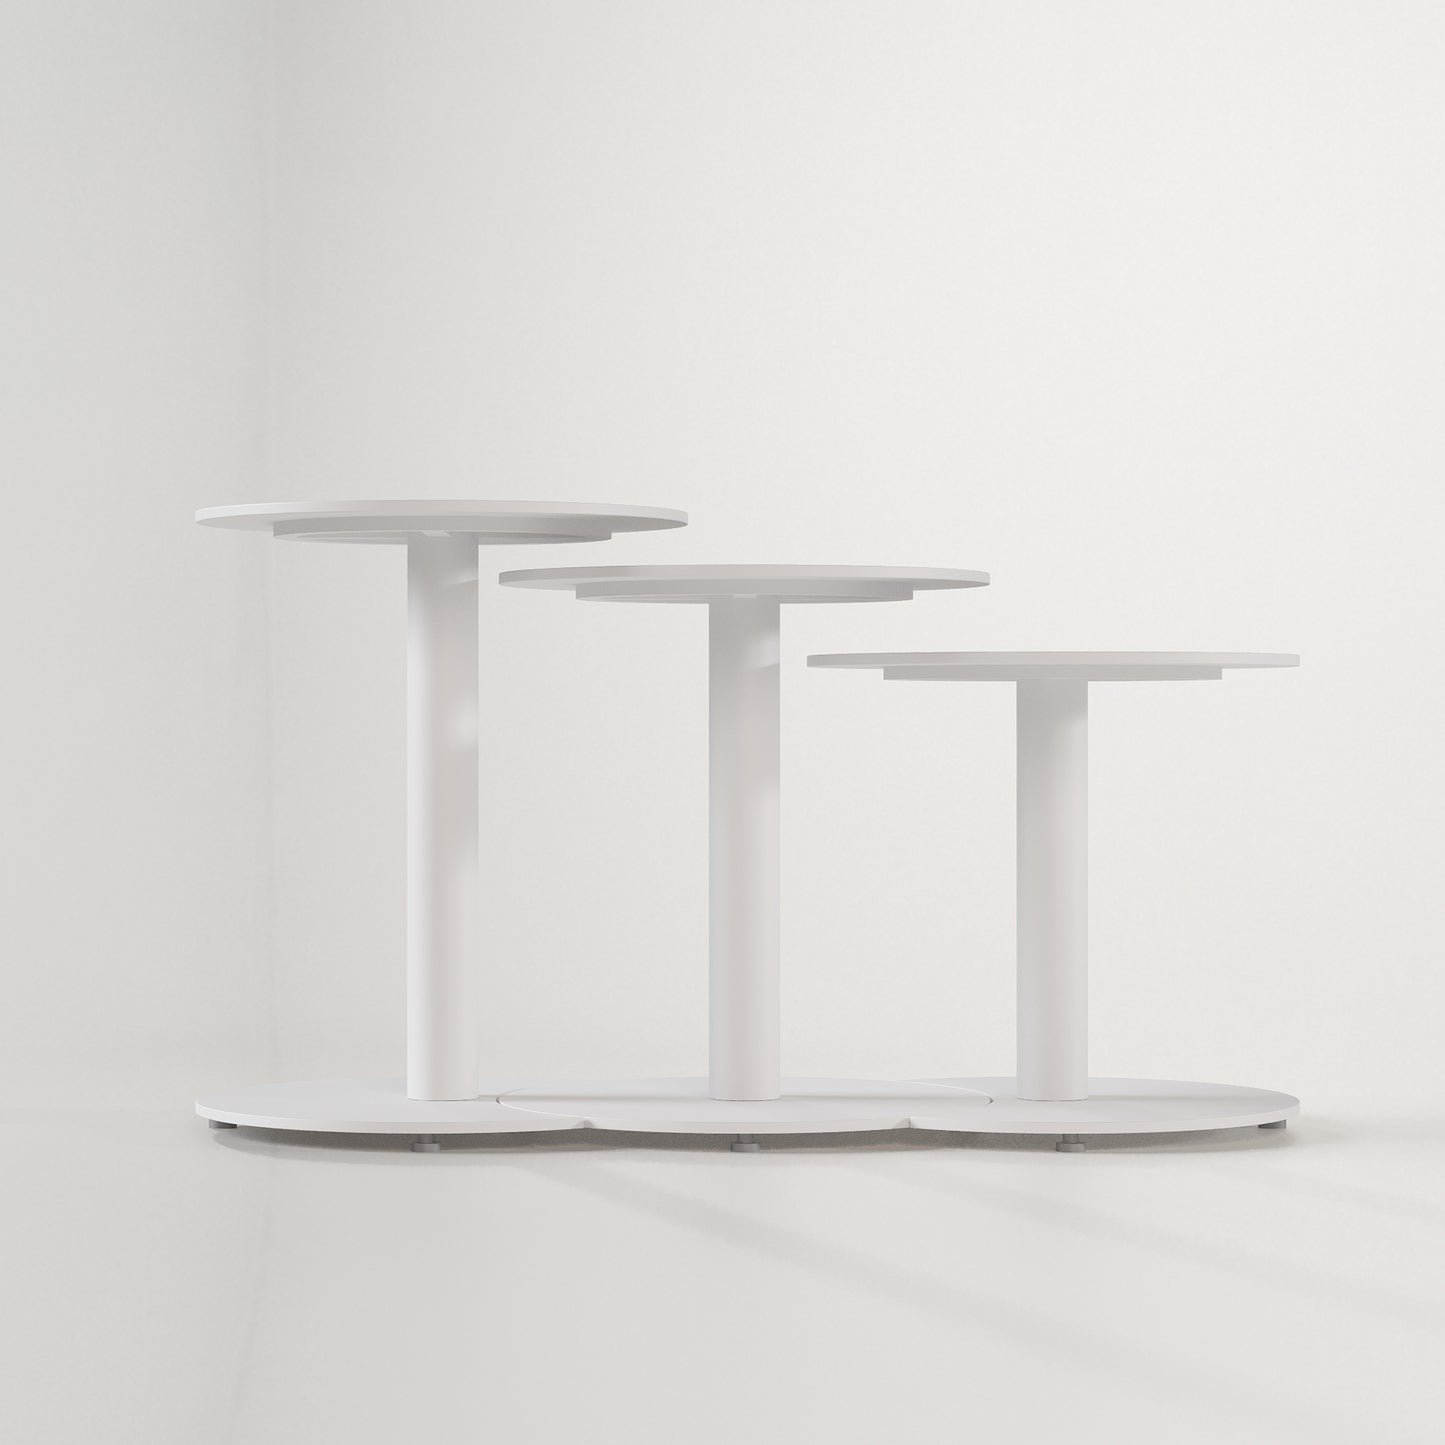 H2O Side Tables [S/3]